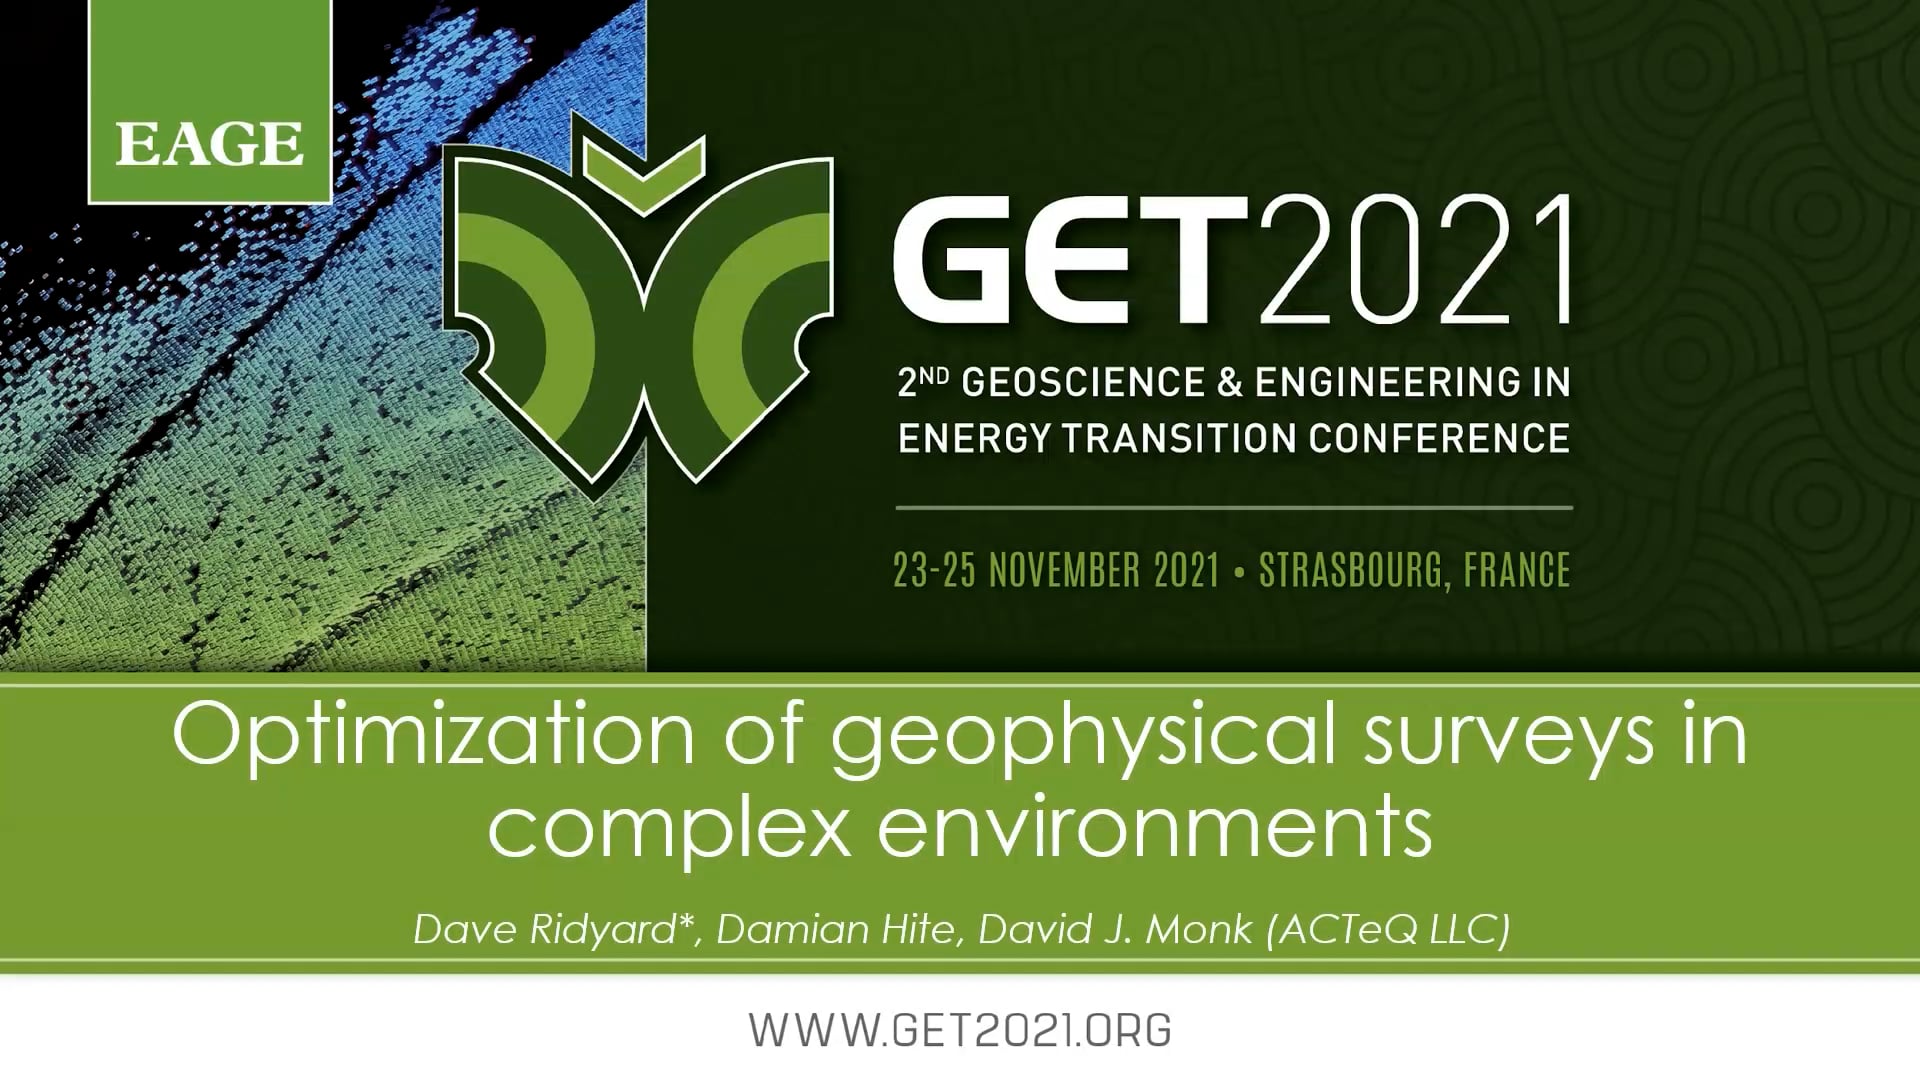 Optimization of geophysical surveys in complex environments